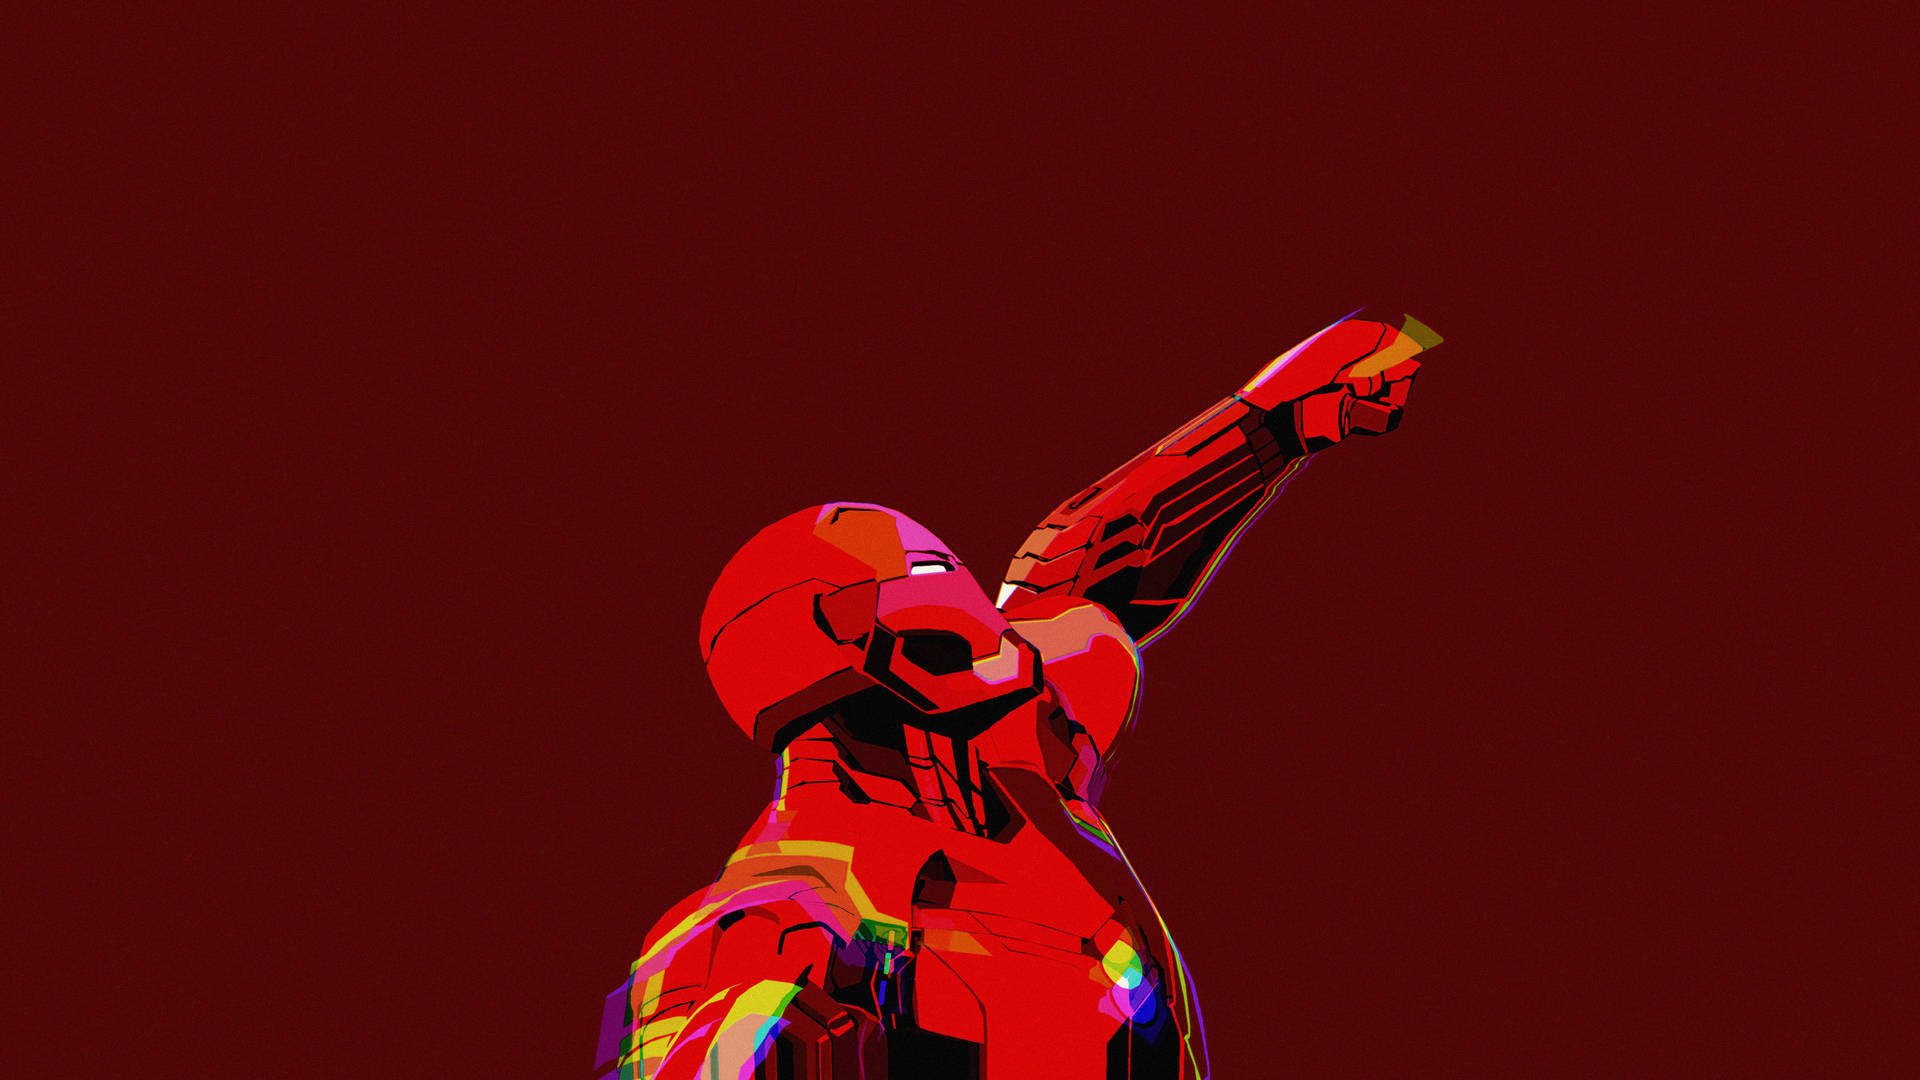 Simple Clean Iron Man Graphic Art Background